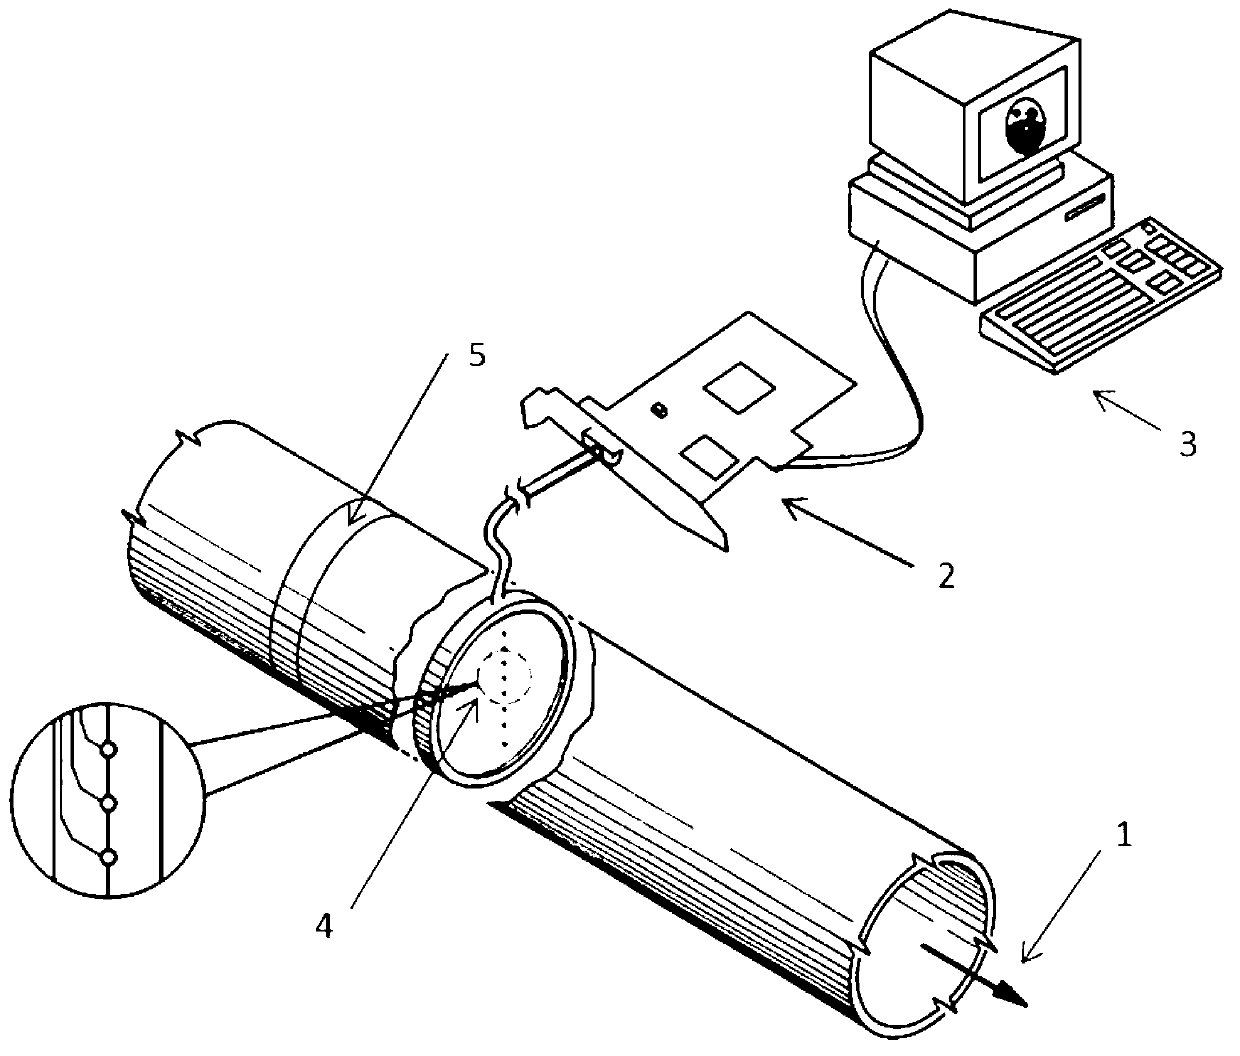 Two-phase flow tomography system based on array-type monopole conducting probe